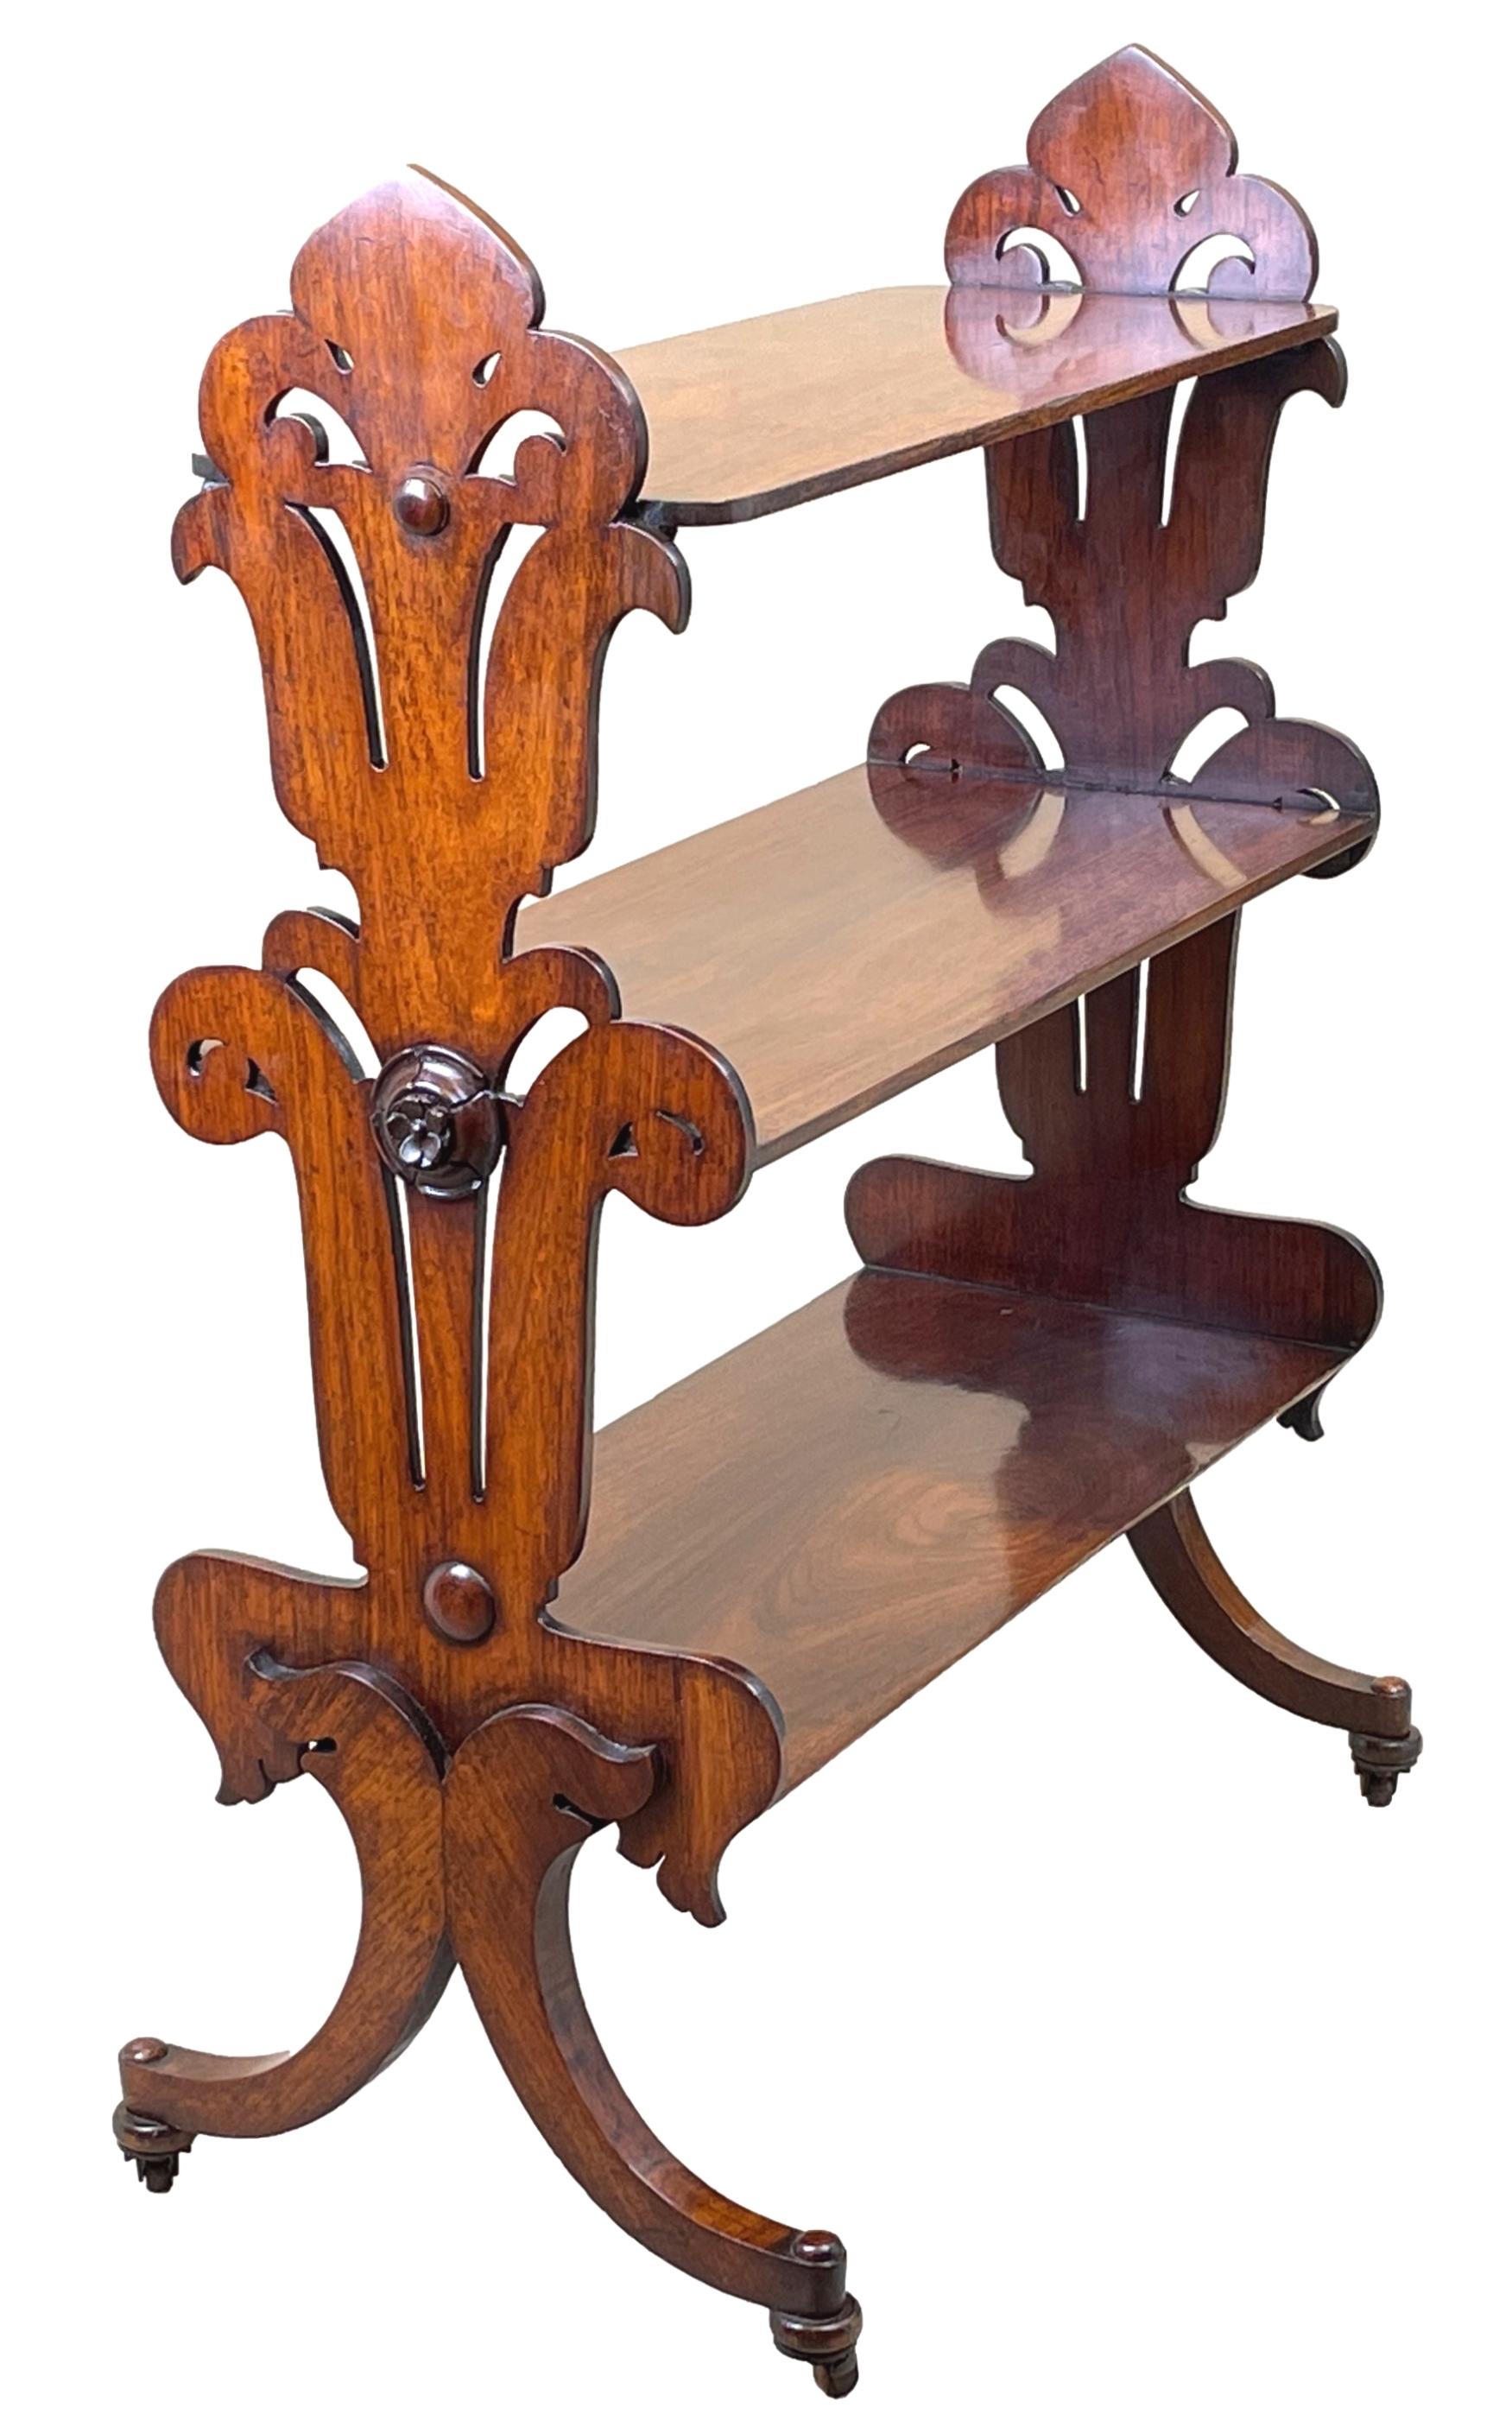 A very unusual and extremely good quality 19th century late Regency period rosewood étagère, or freestanding open bookshelf, having three superbly figured tiers flanked by elegant shaped and pierced end supports with attractive carved patrae,